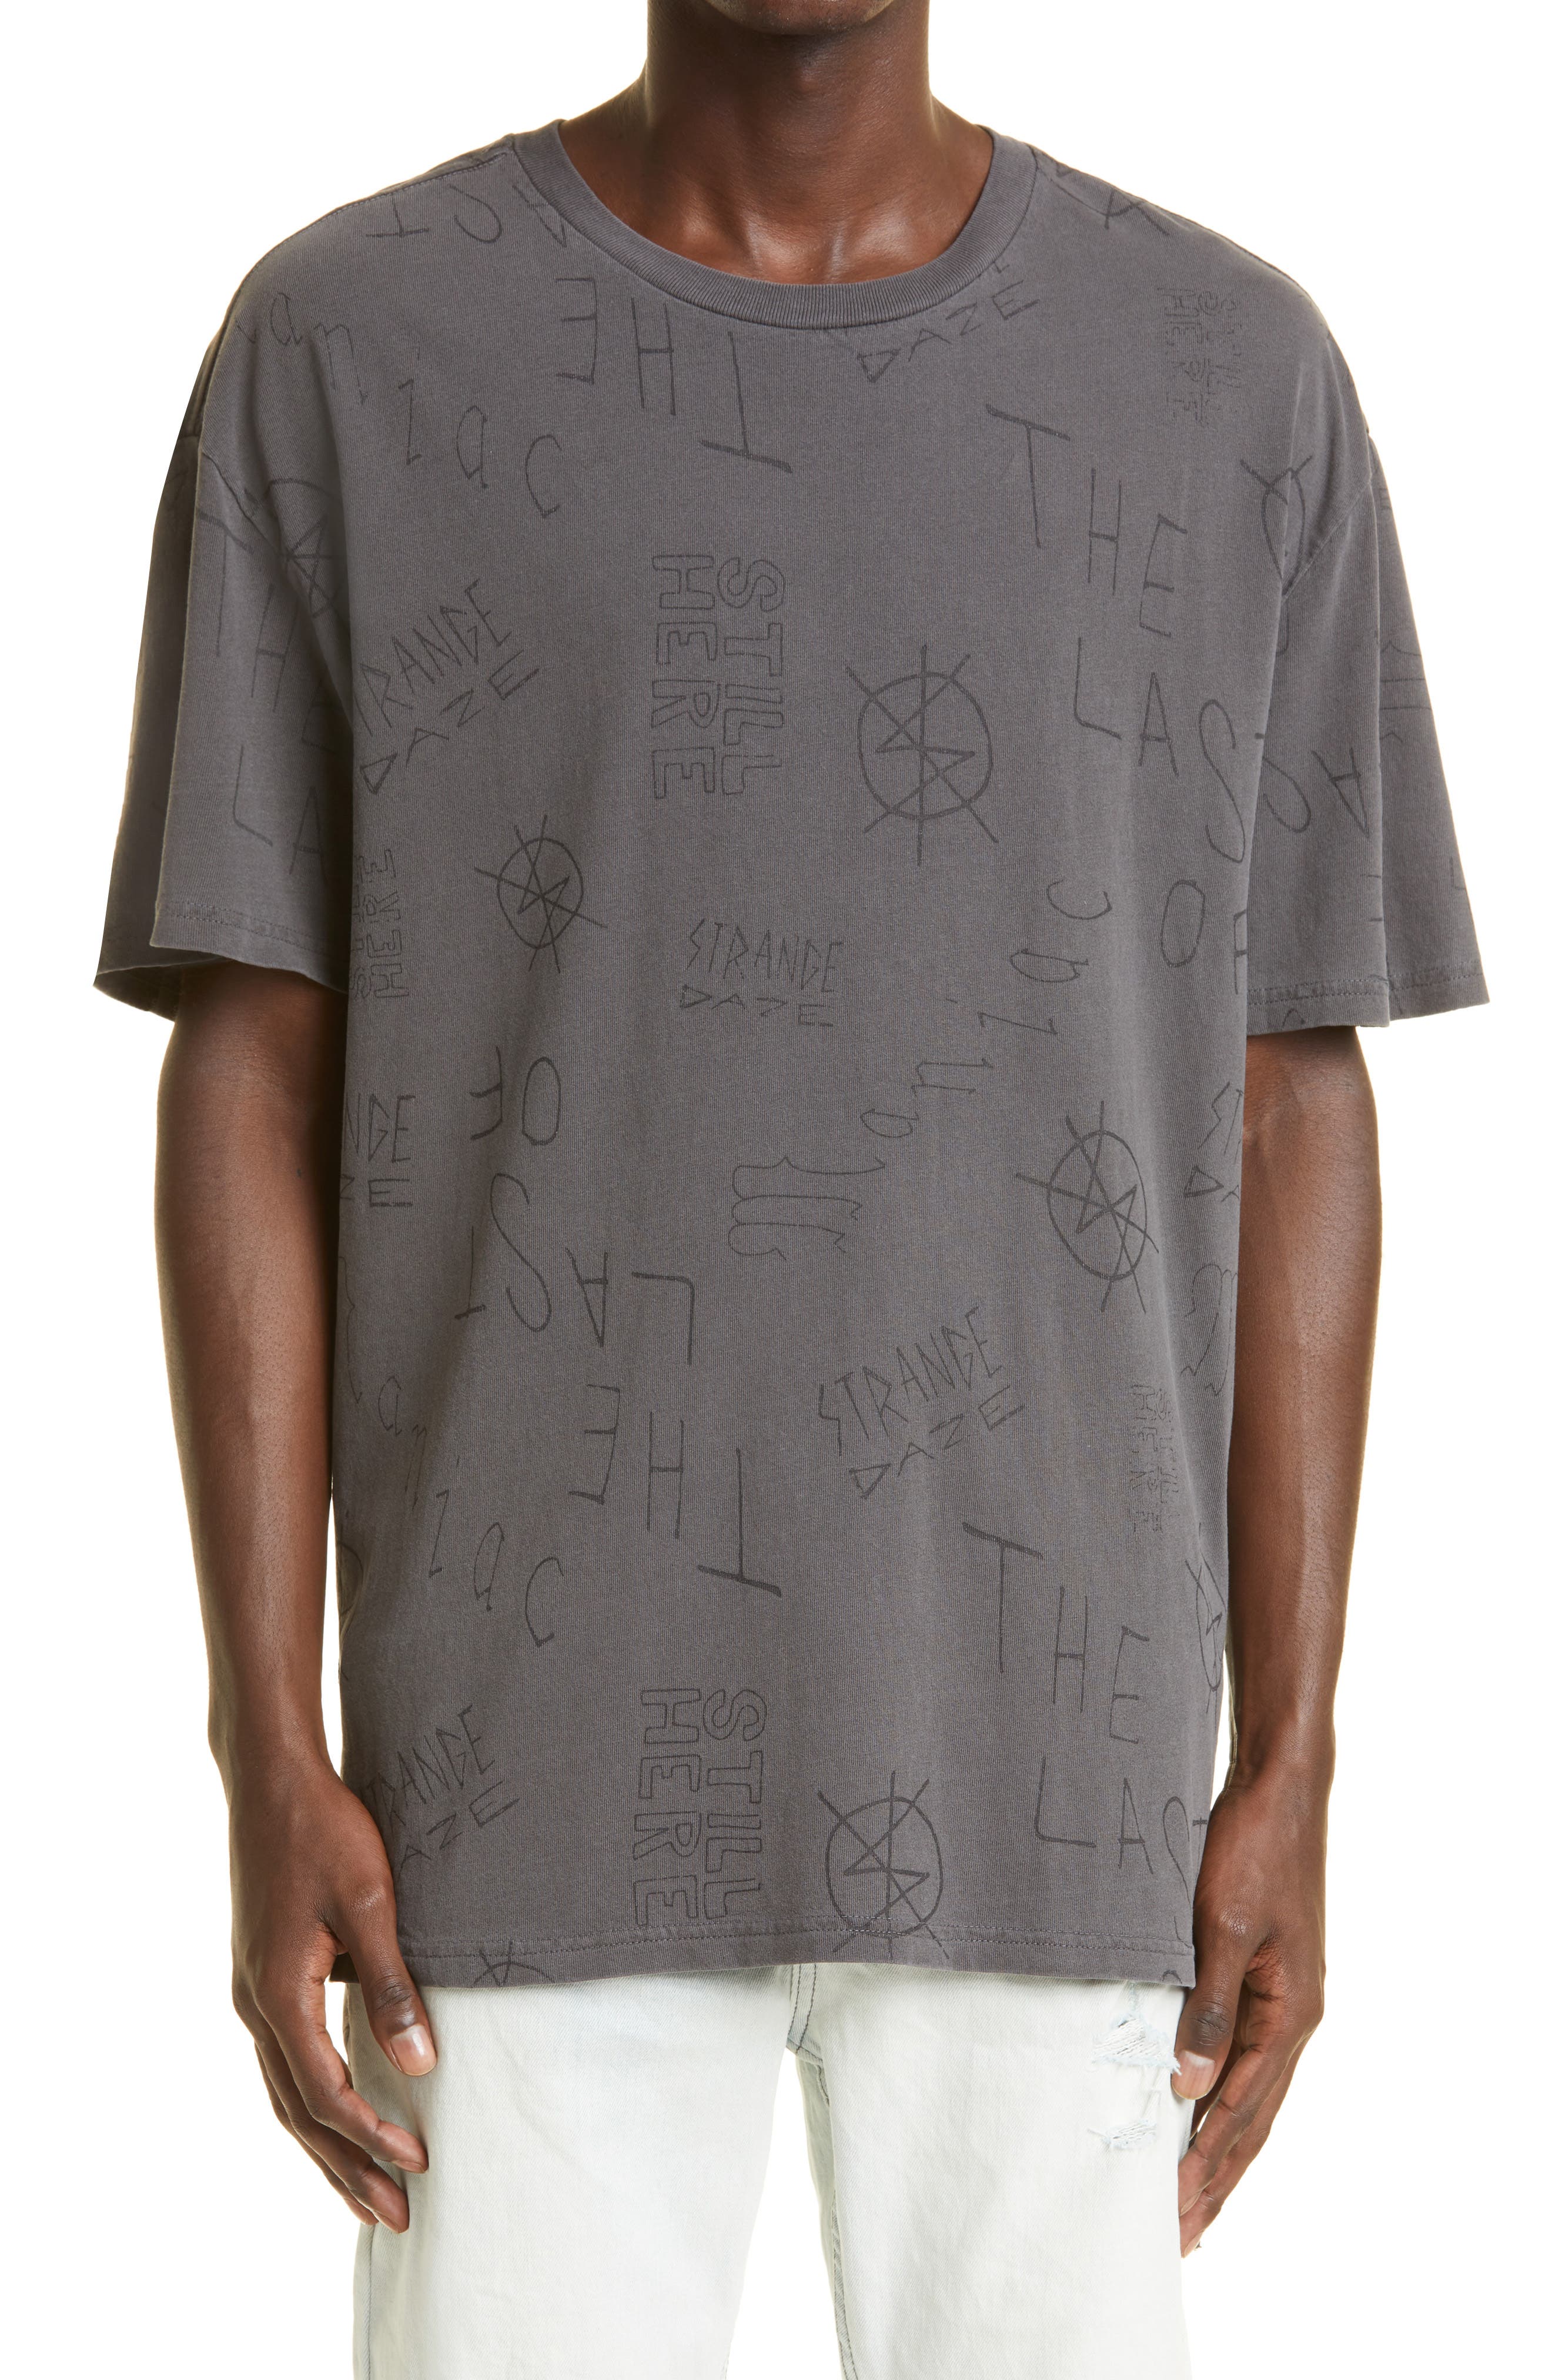 Ksubi Men's Nowhere Biggie Faded Cotton Graphic Tee in Black at Nordstrom, Size Large